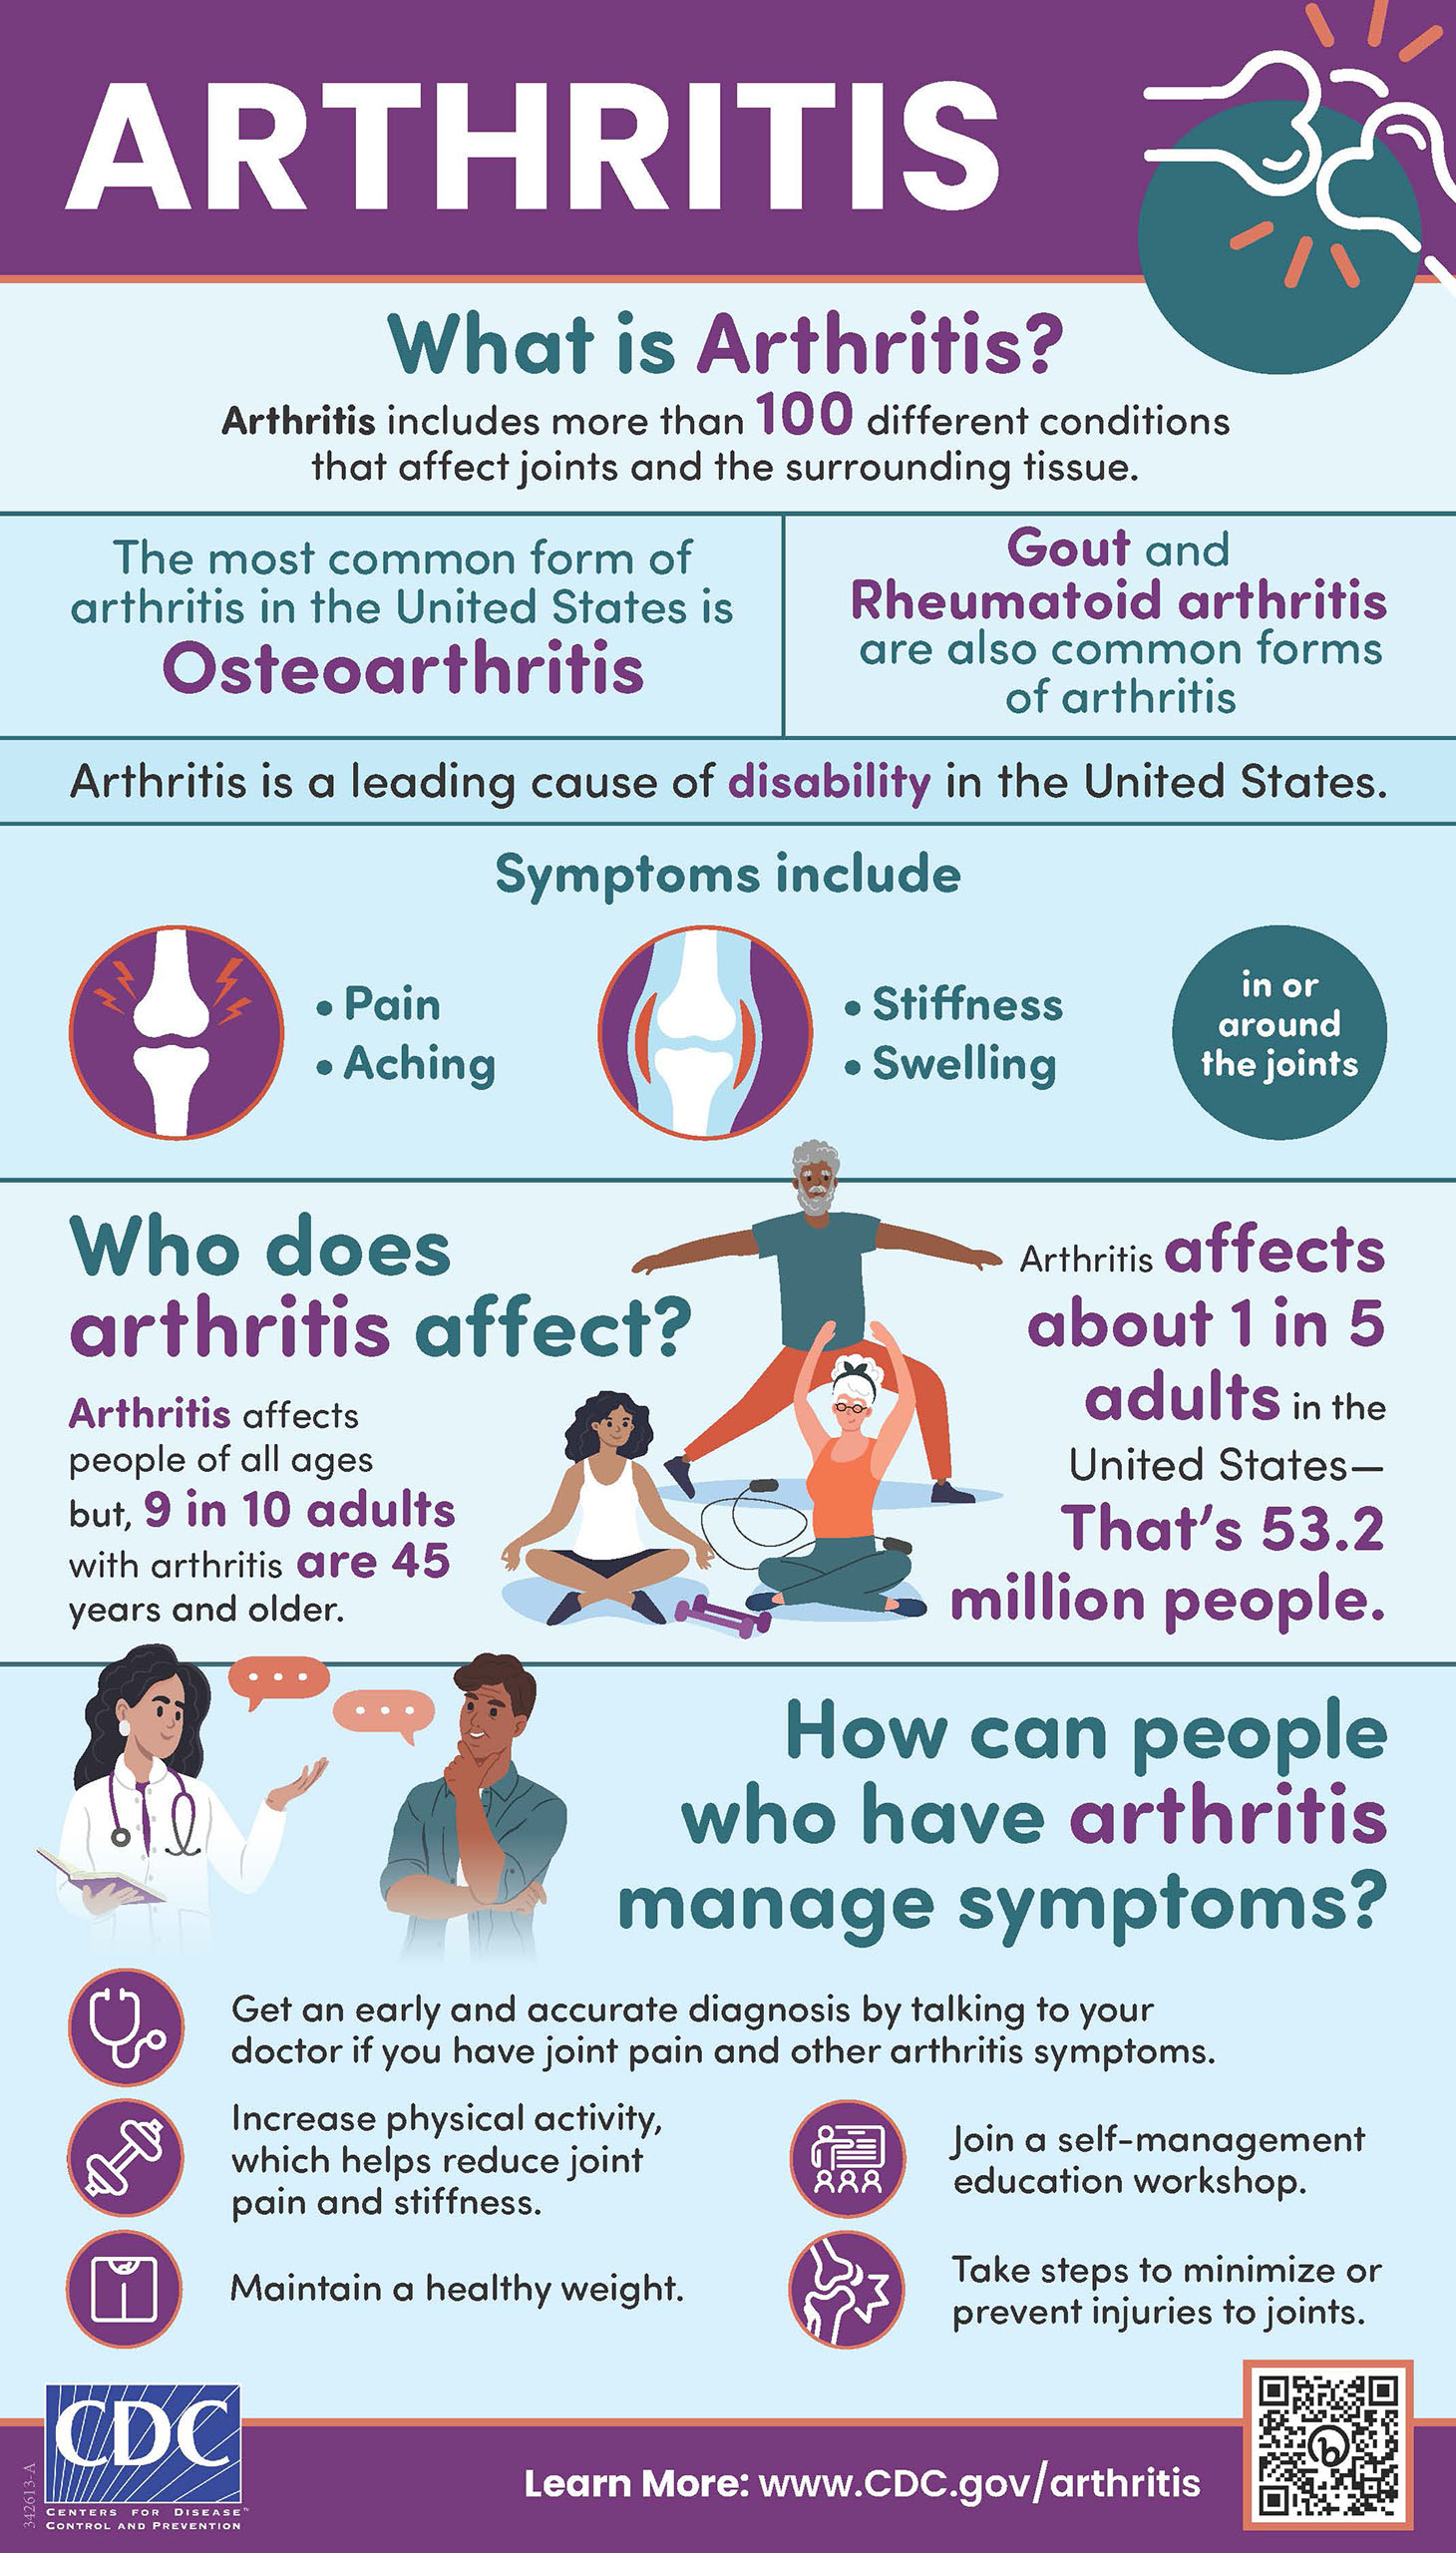 4 steps for managing early arthritis